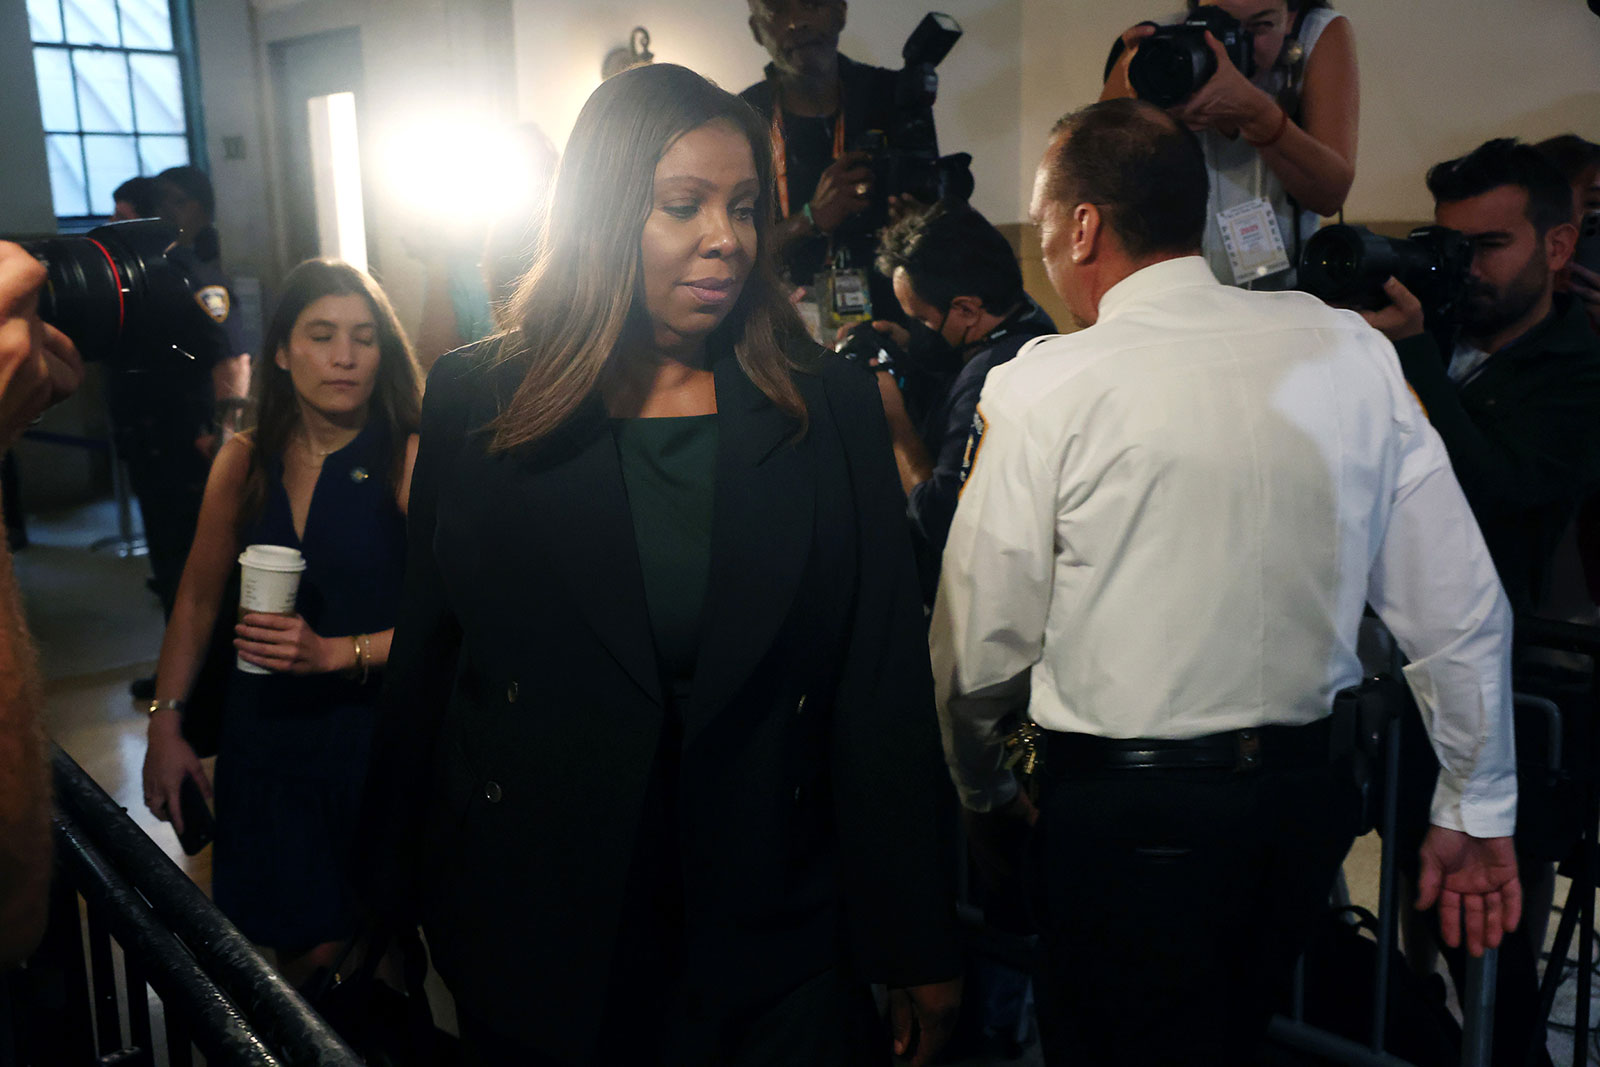 New York Attorney General Letitia James arrives at New York Supreme Court on Tuesday in New York.